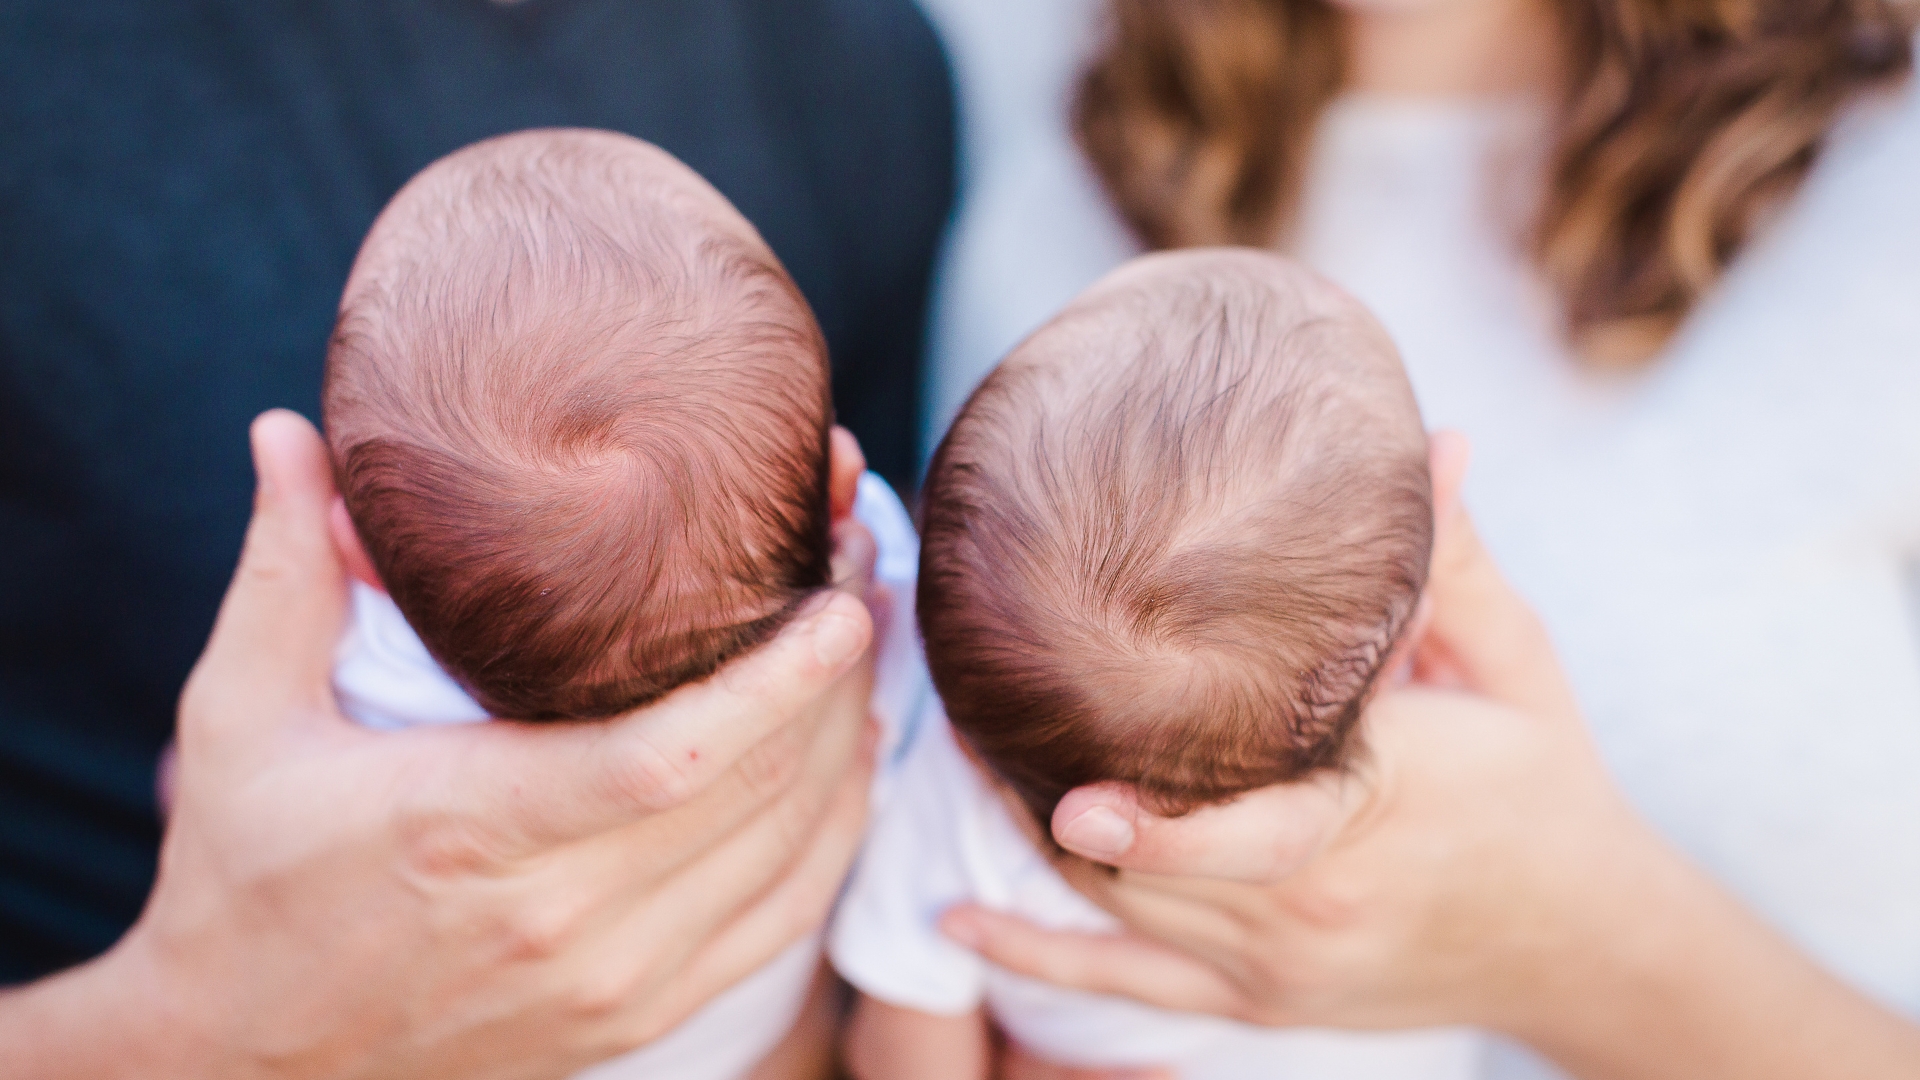 A 64-year-old woman has twins, but justice intervenes and takes her children out